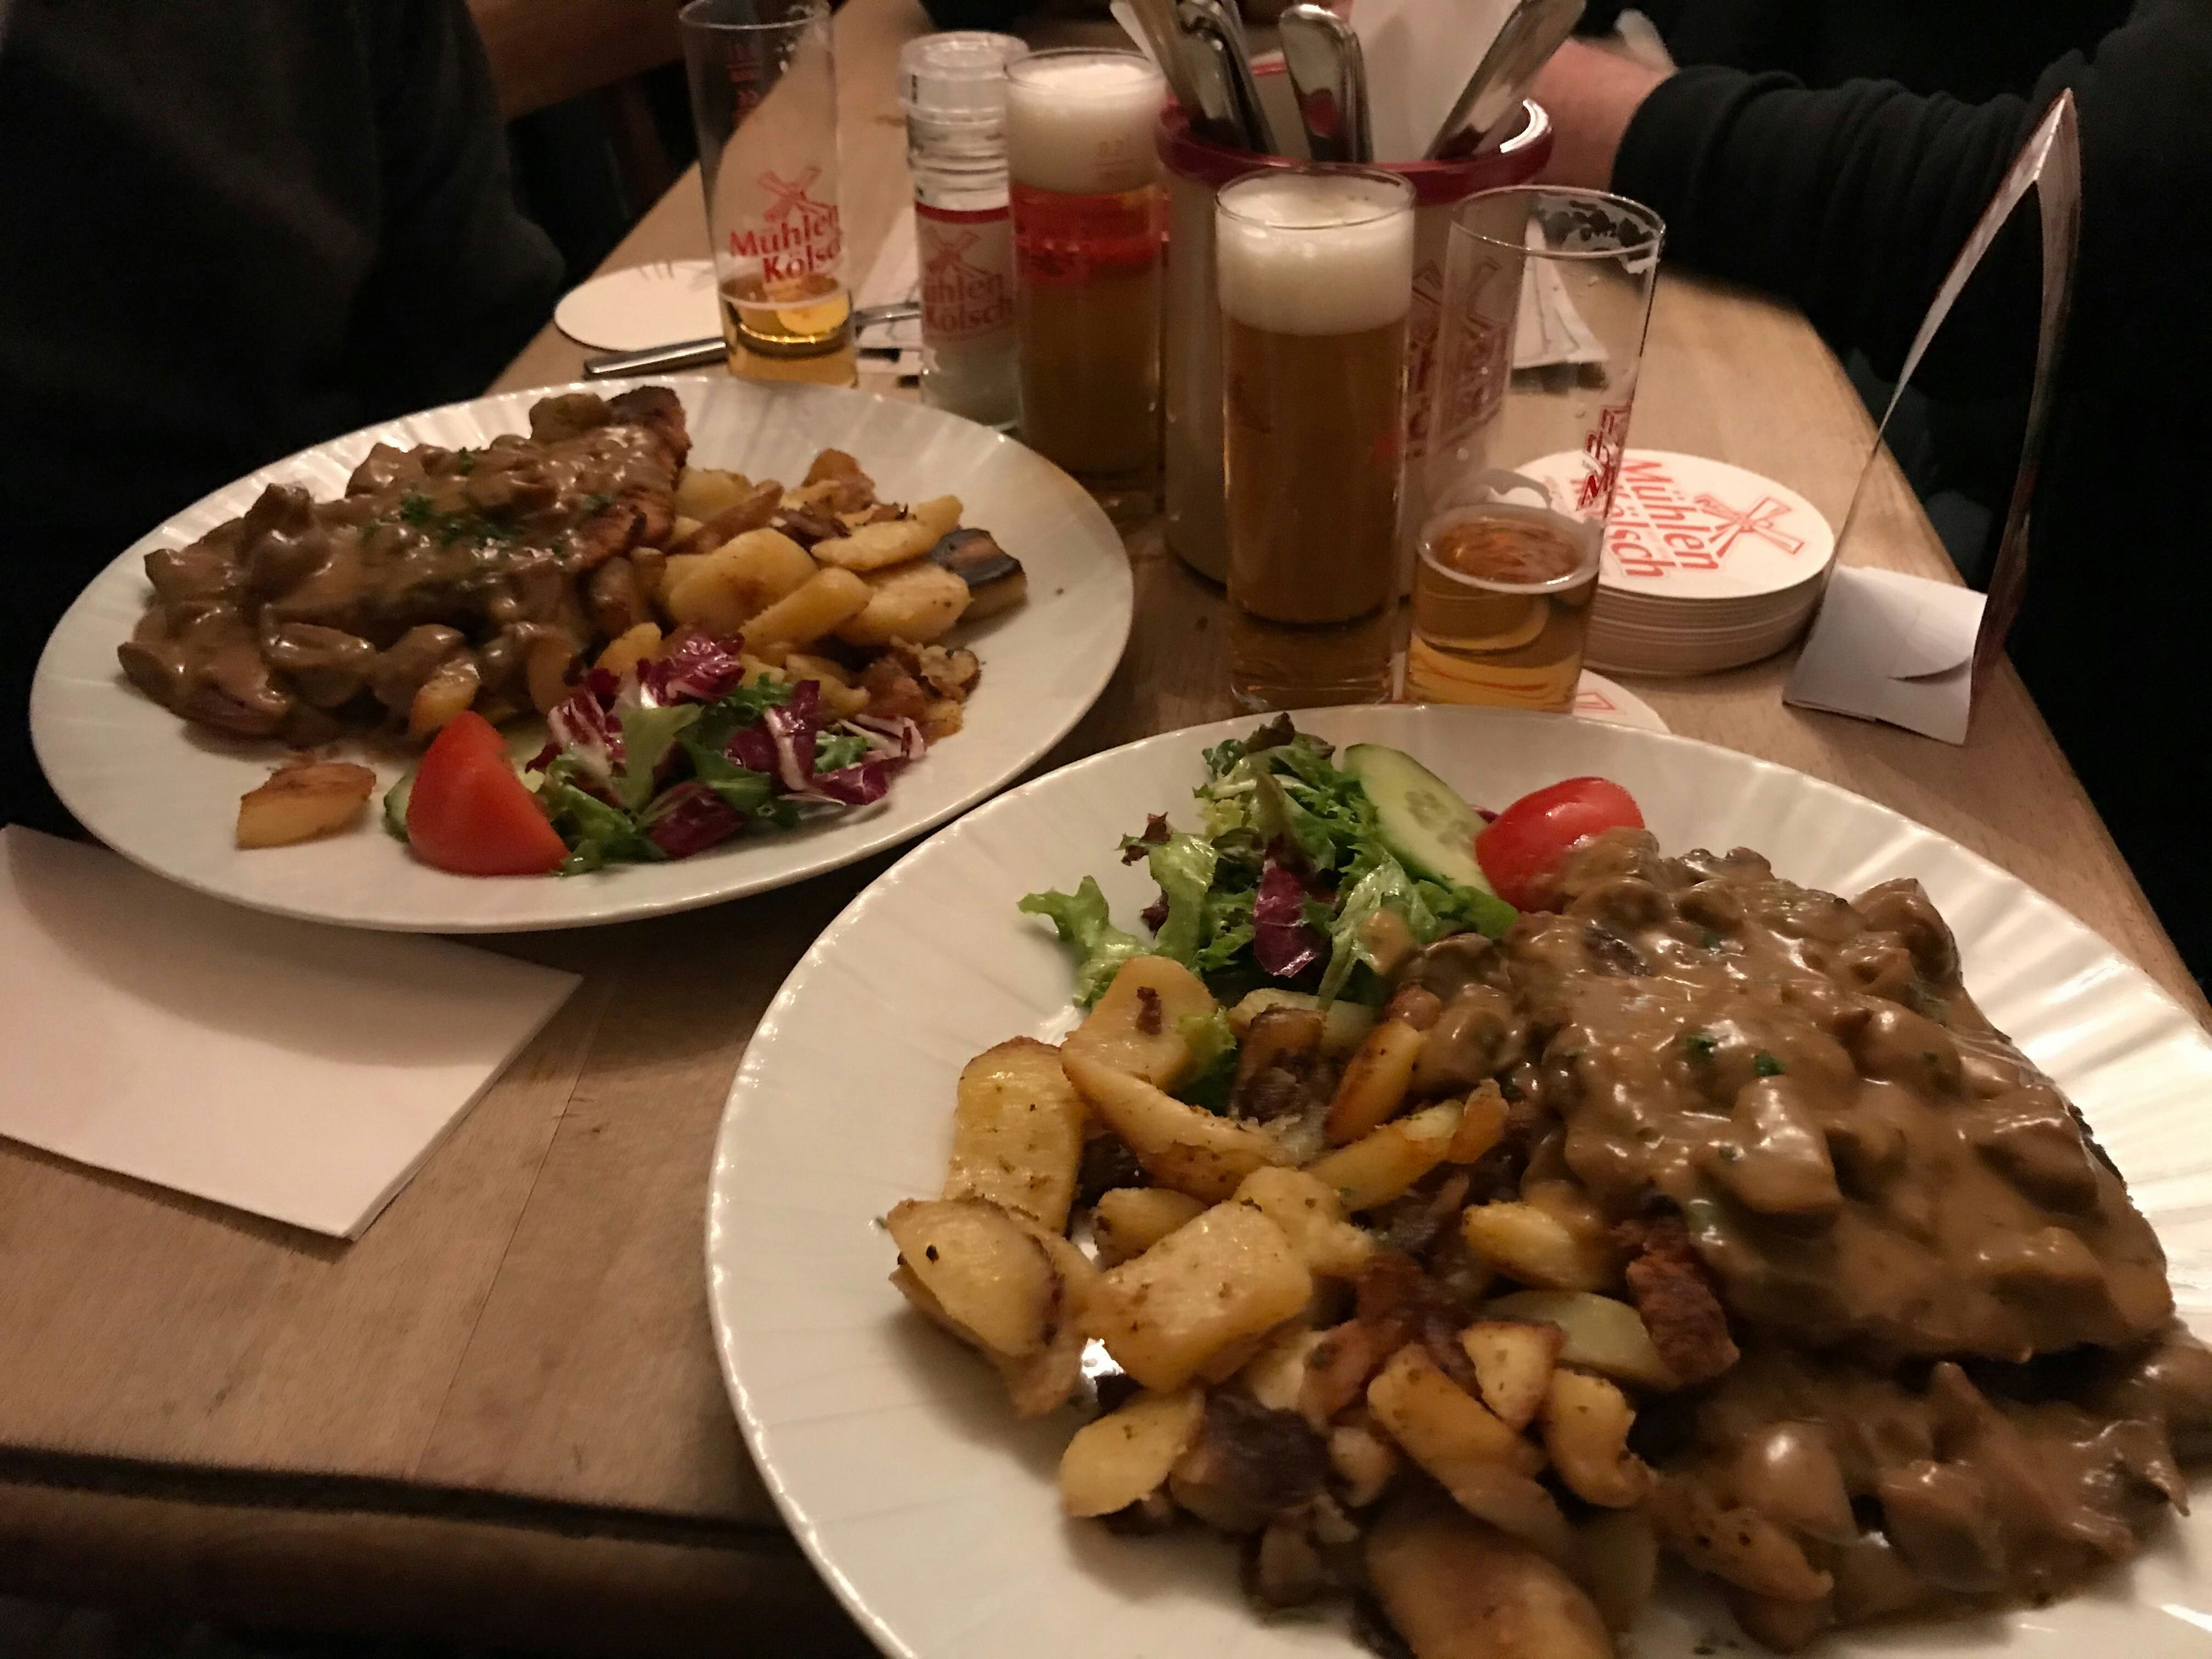 Two plates of mushroom schnitzel with fried potato and small glasses of beer on a wooden table.JPG